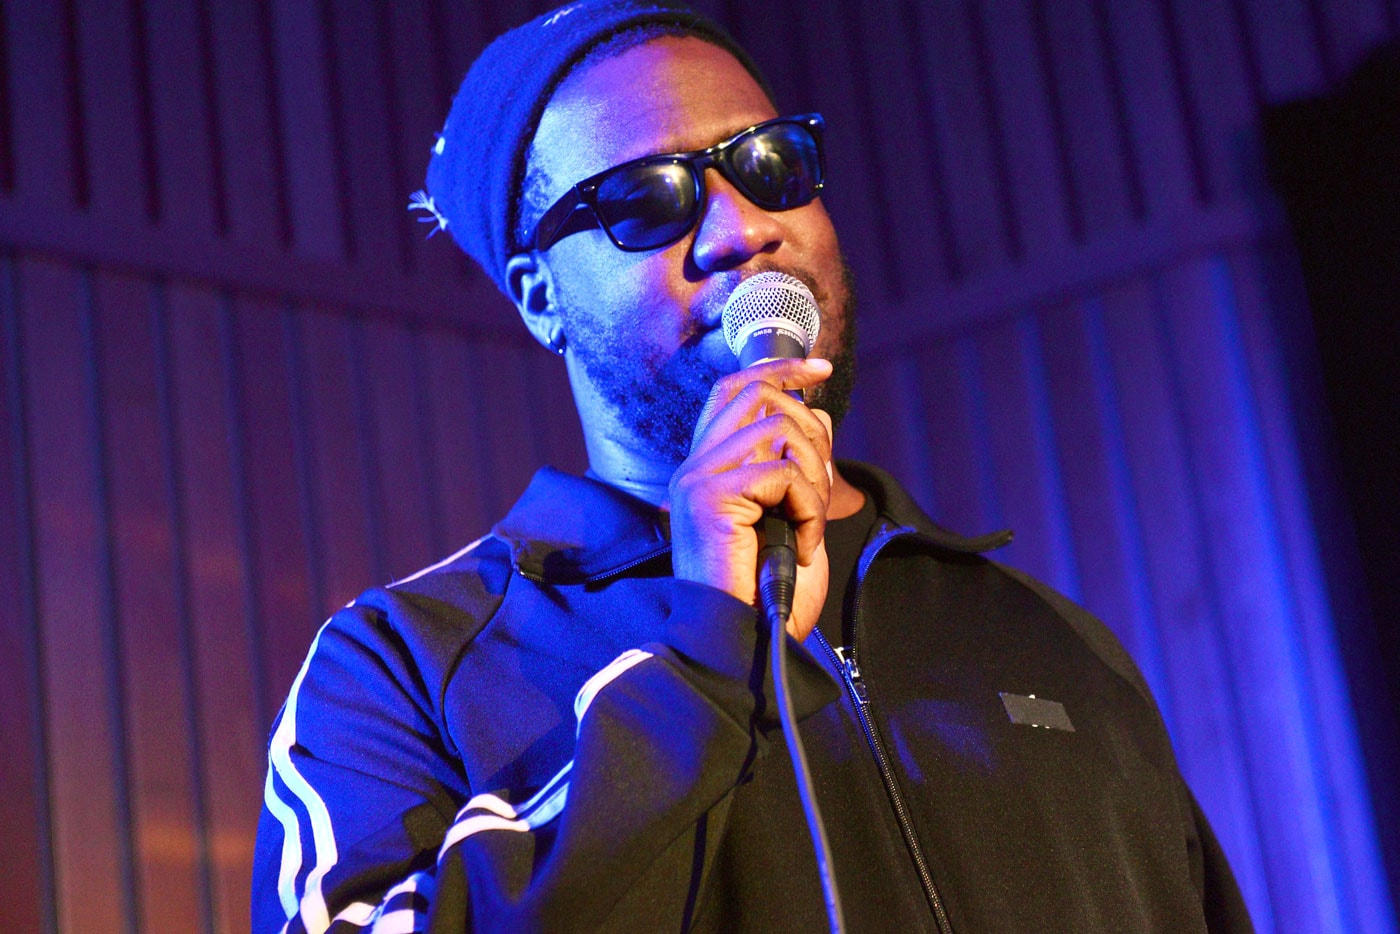 Q-Tip Chats With D'Angelo, Calls André 3000 on Beats 1 Radio Show